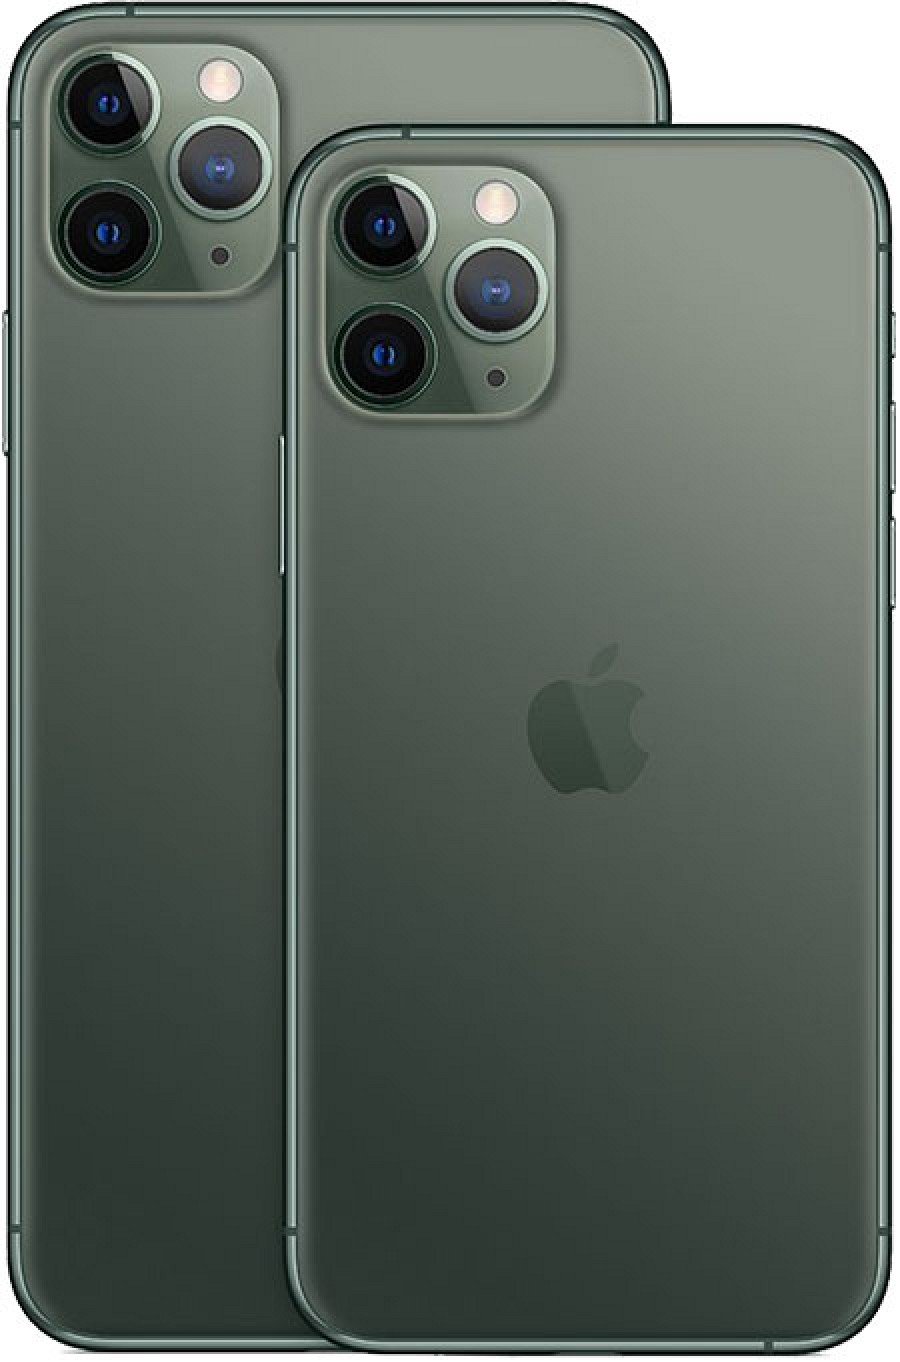 iphone-11-pro-select-2019-family